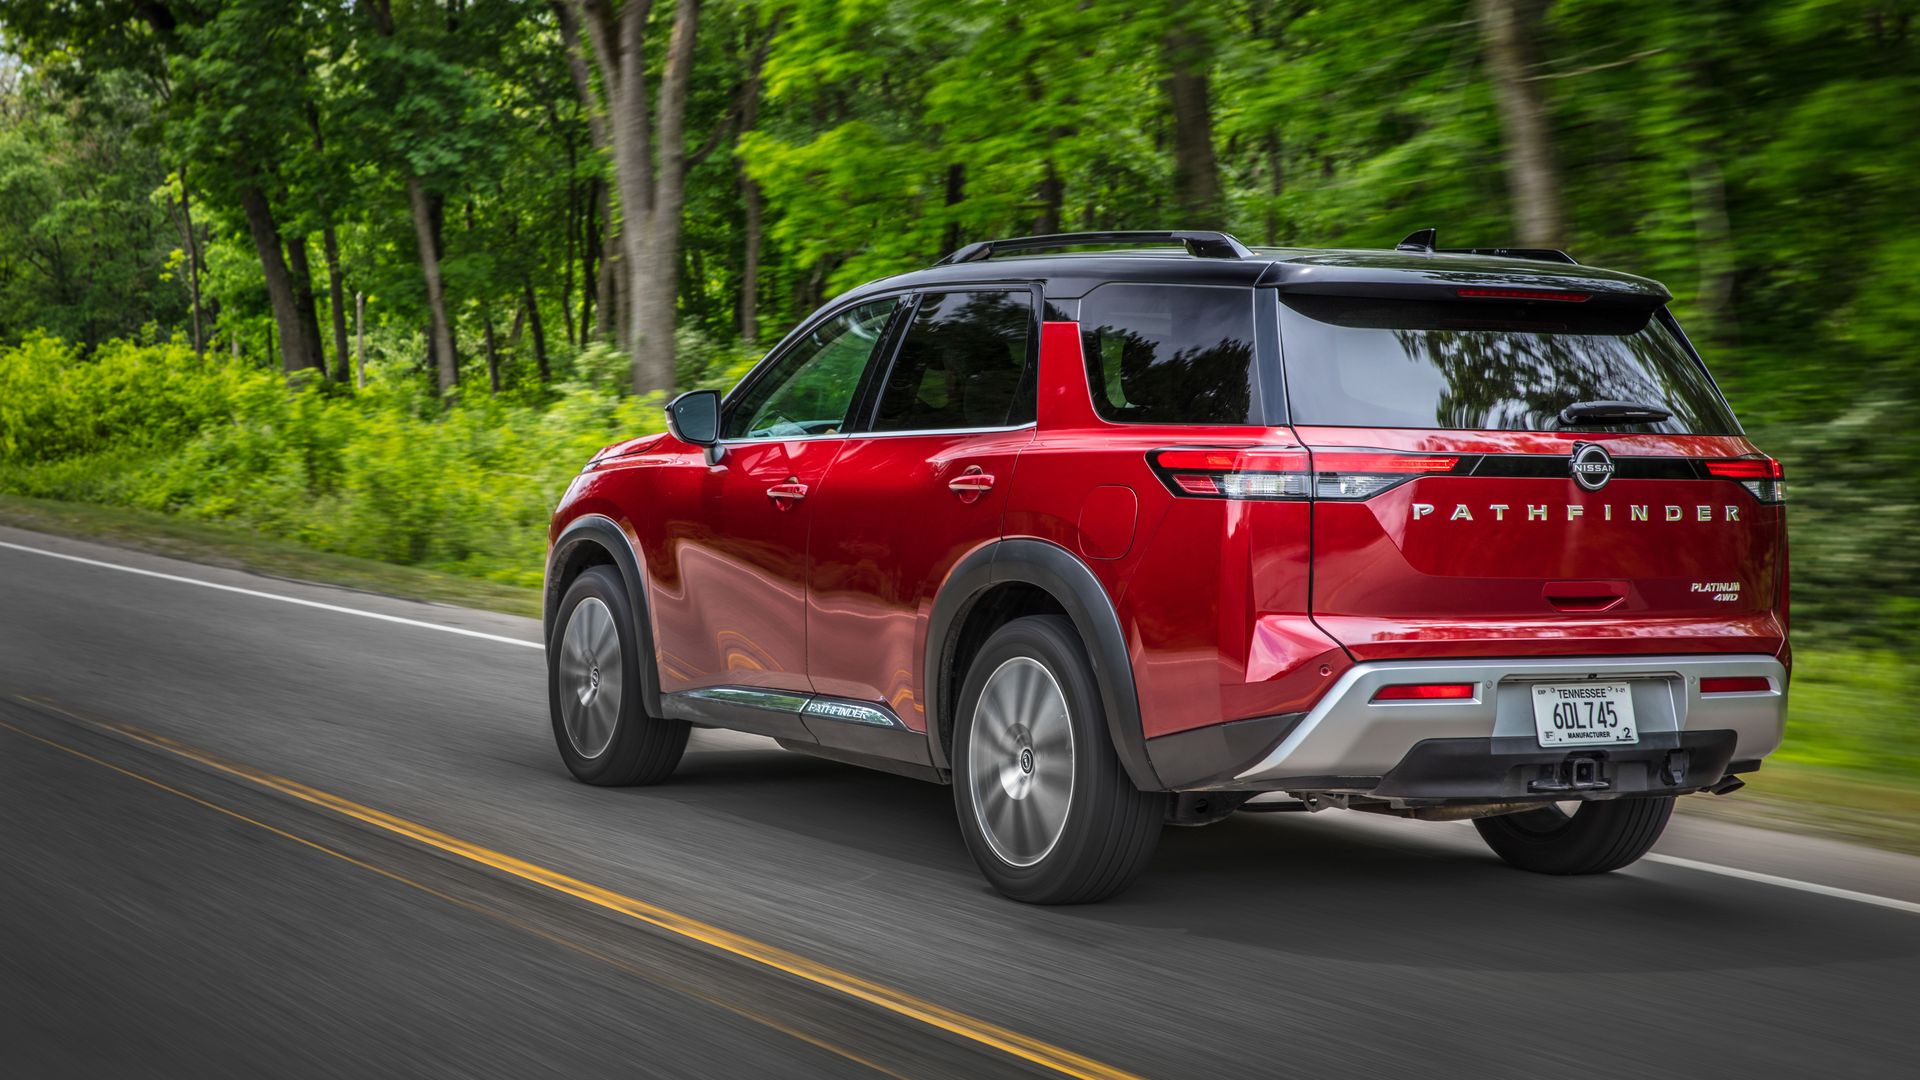 Image of a red 2022 Nissan Pathfinder SUV on a country road. 